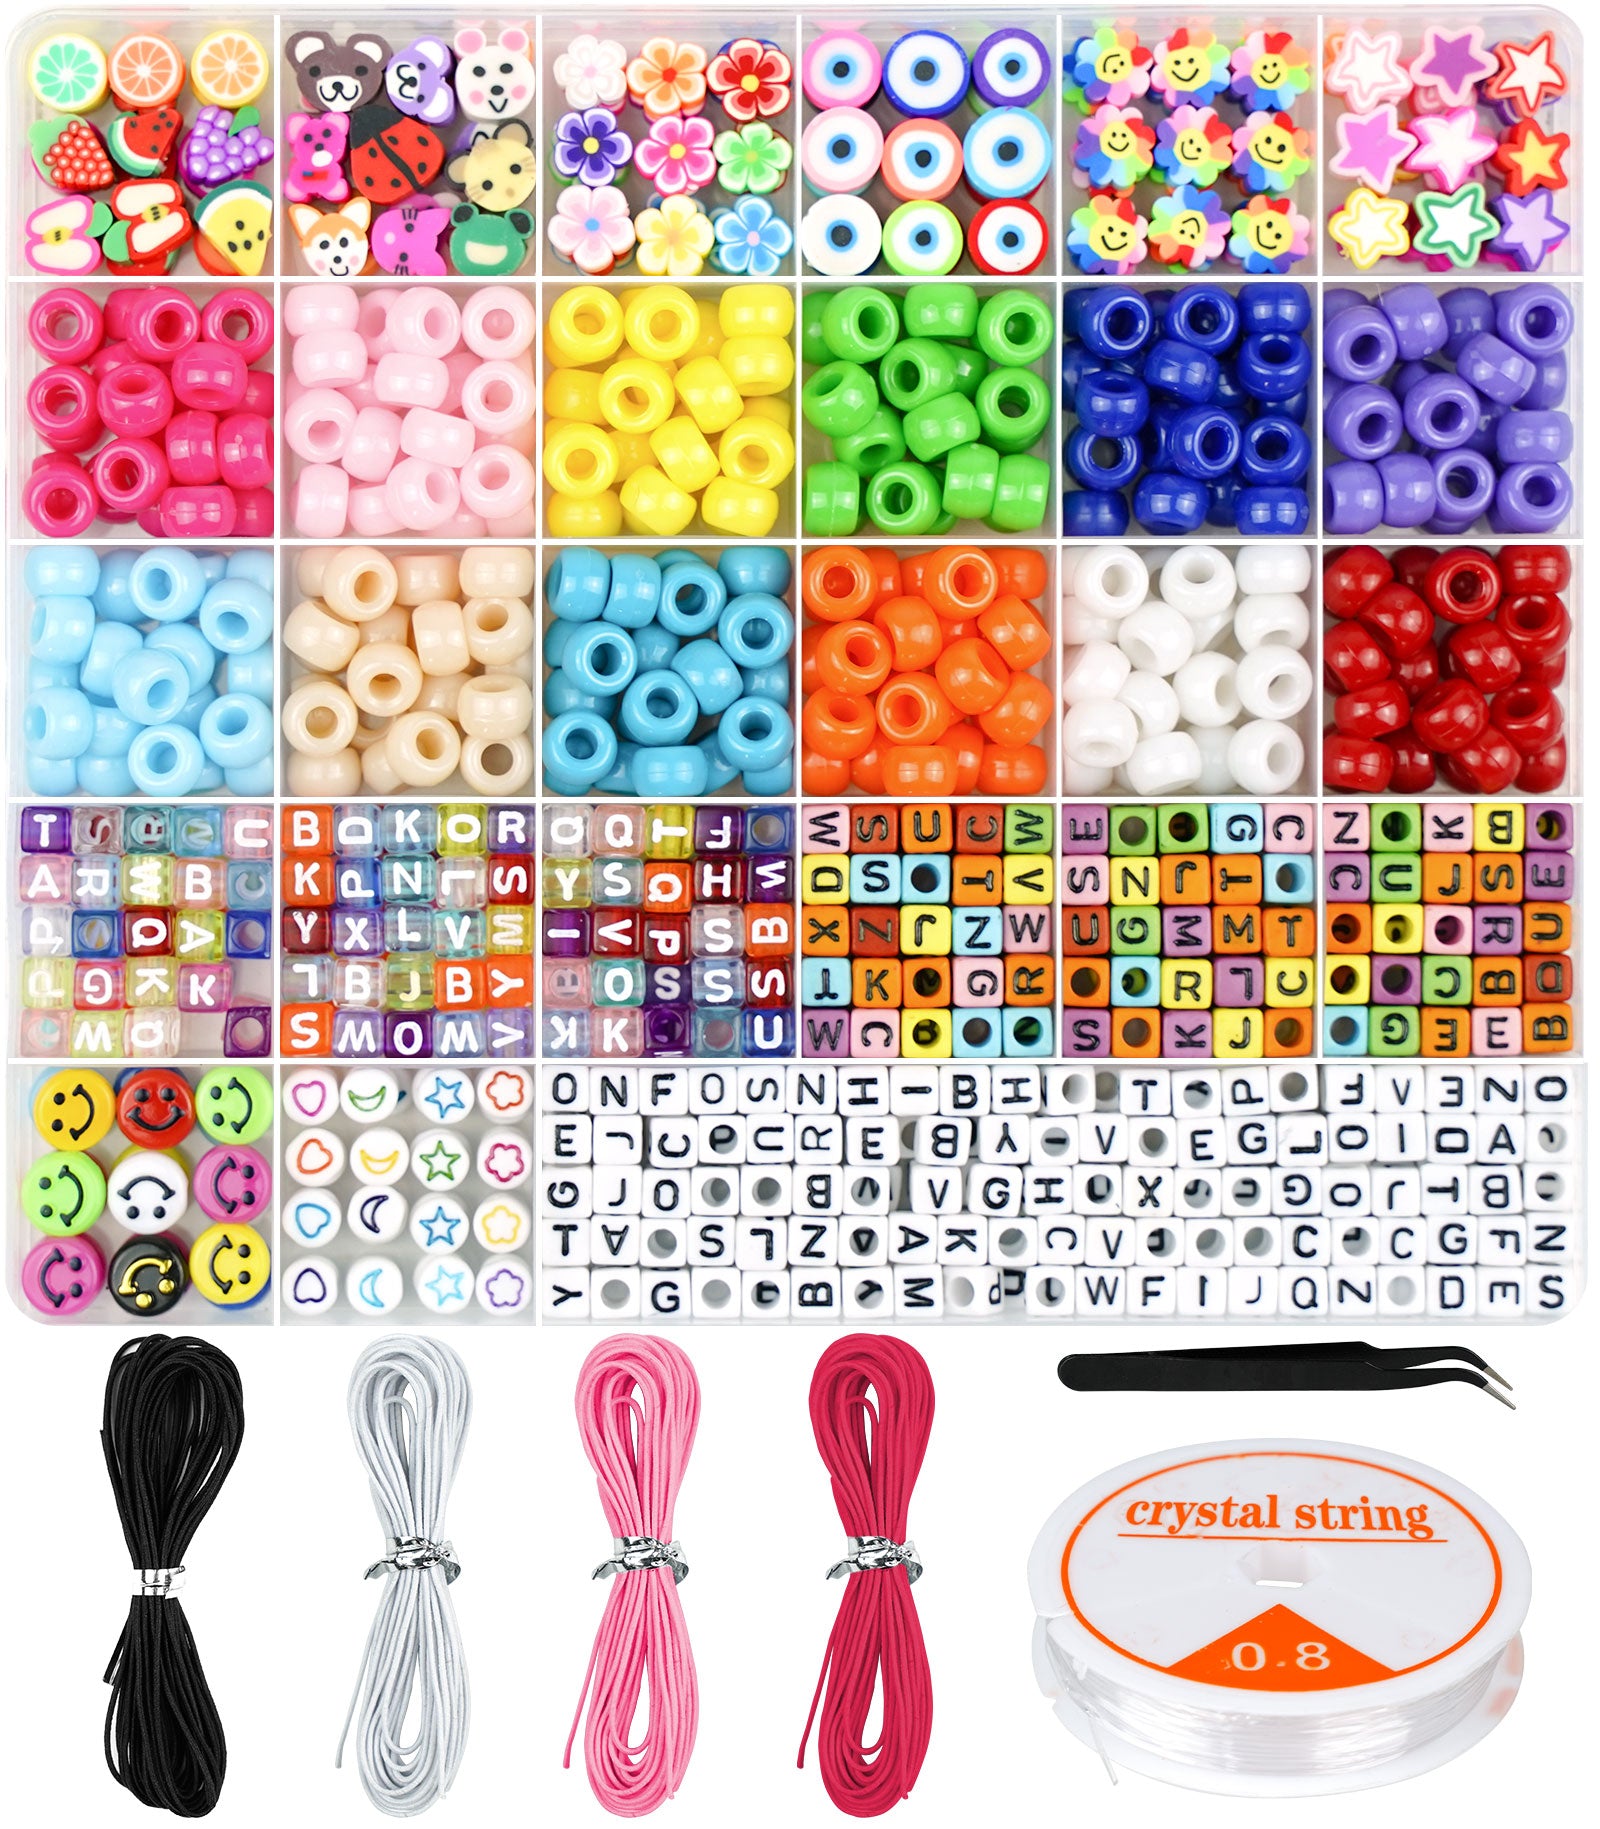 Bracelet Making Craft Kit For Girls,jewelry Making Supplies Beads Charms  Bracelets For Diy Craft Gifts Toys For Teen Girls Age 4 5 6 7 8 9 10 12